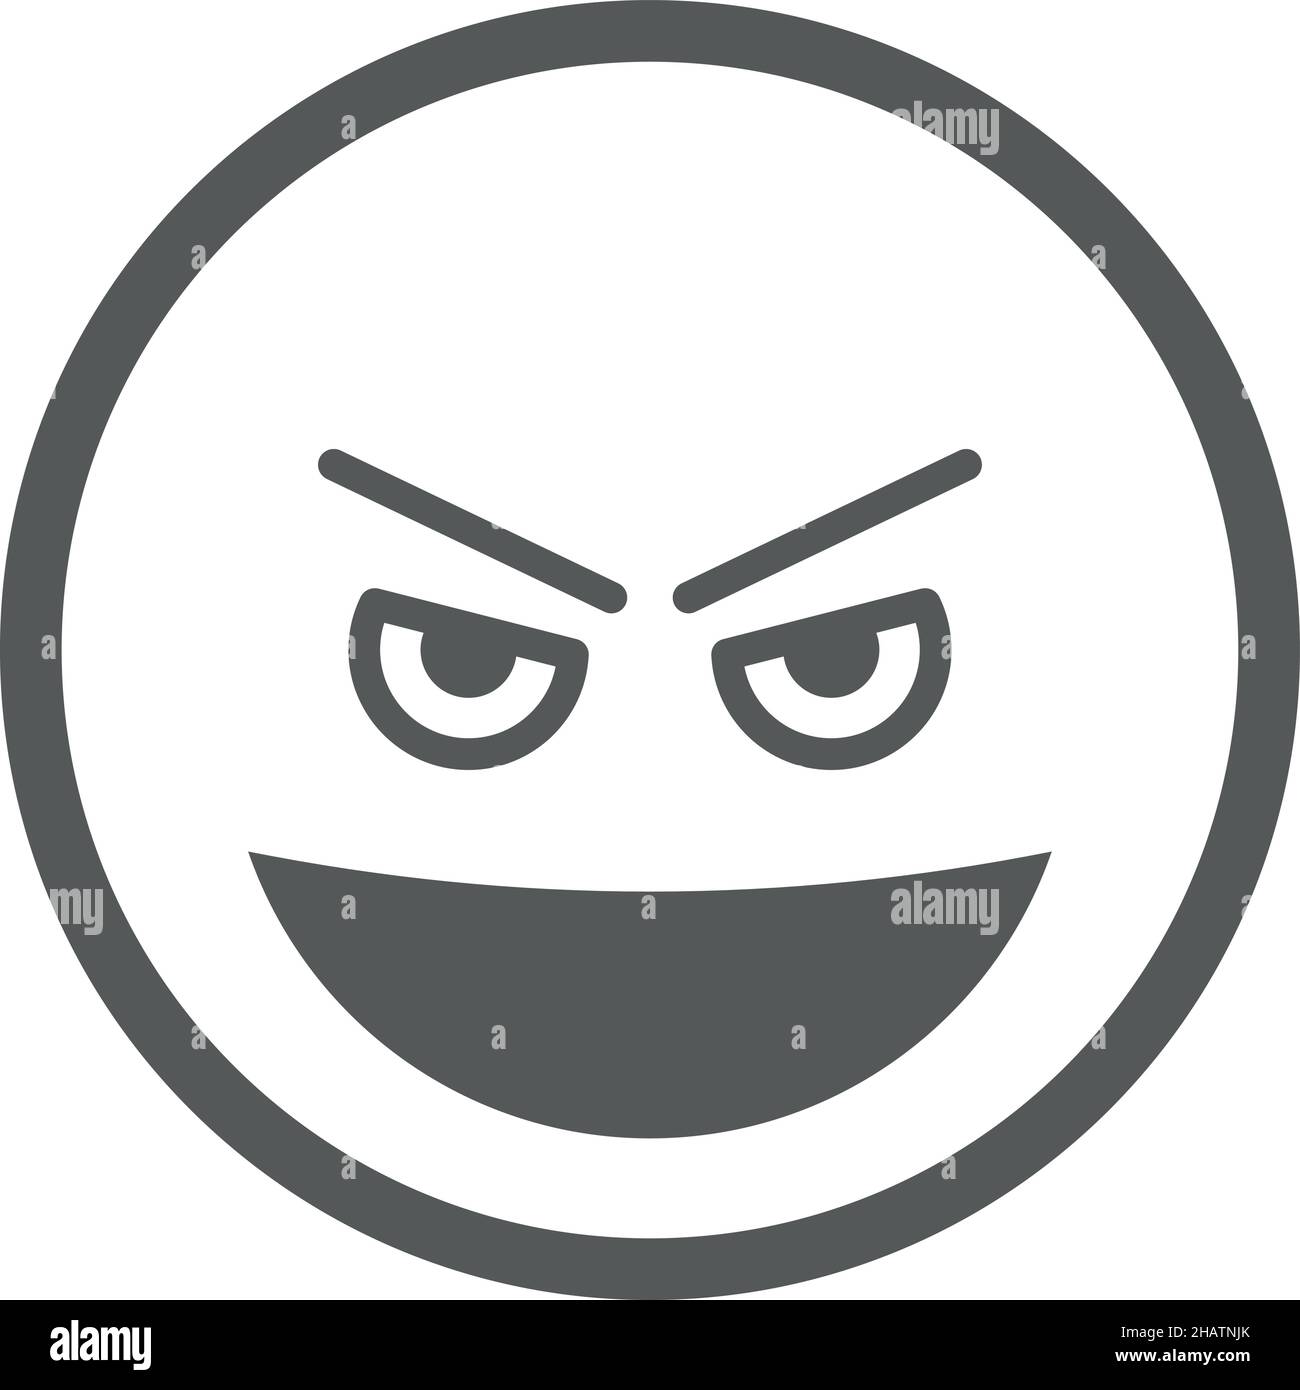 Evil grin face icon. Wicked smiling emoji Stock Vector